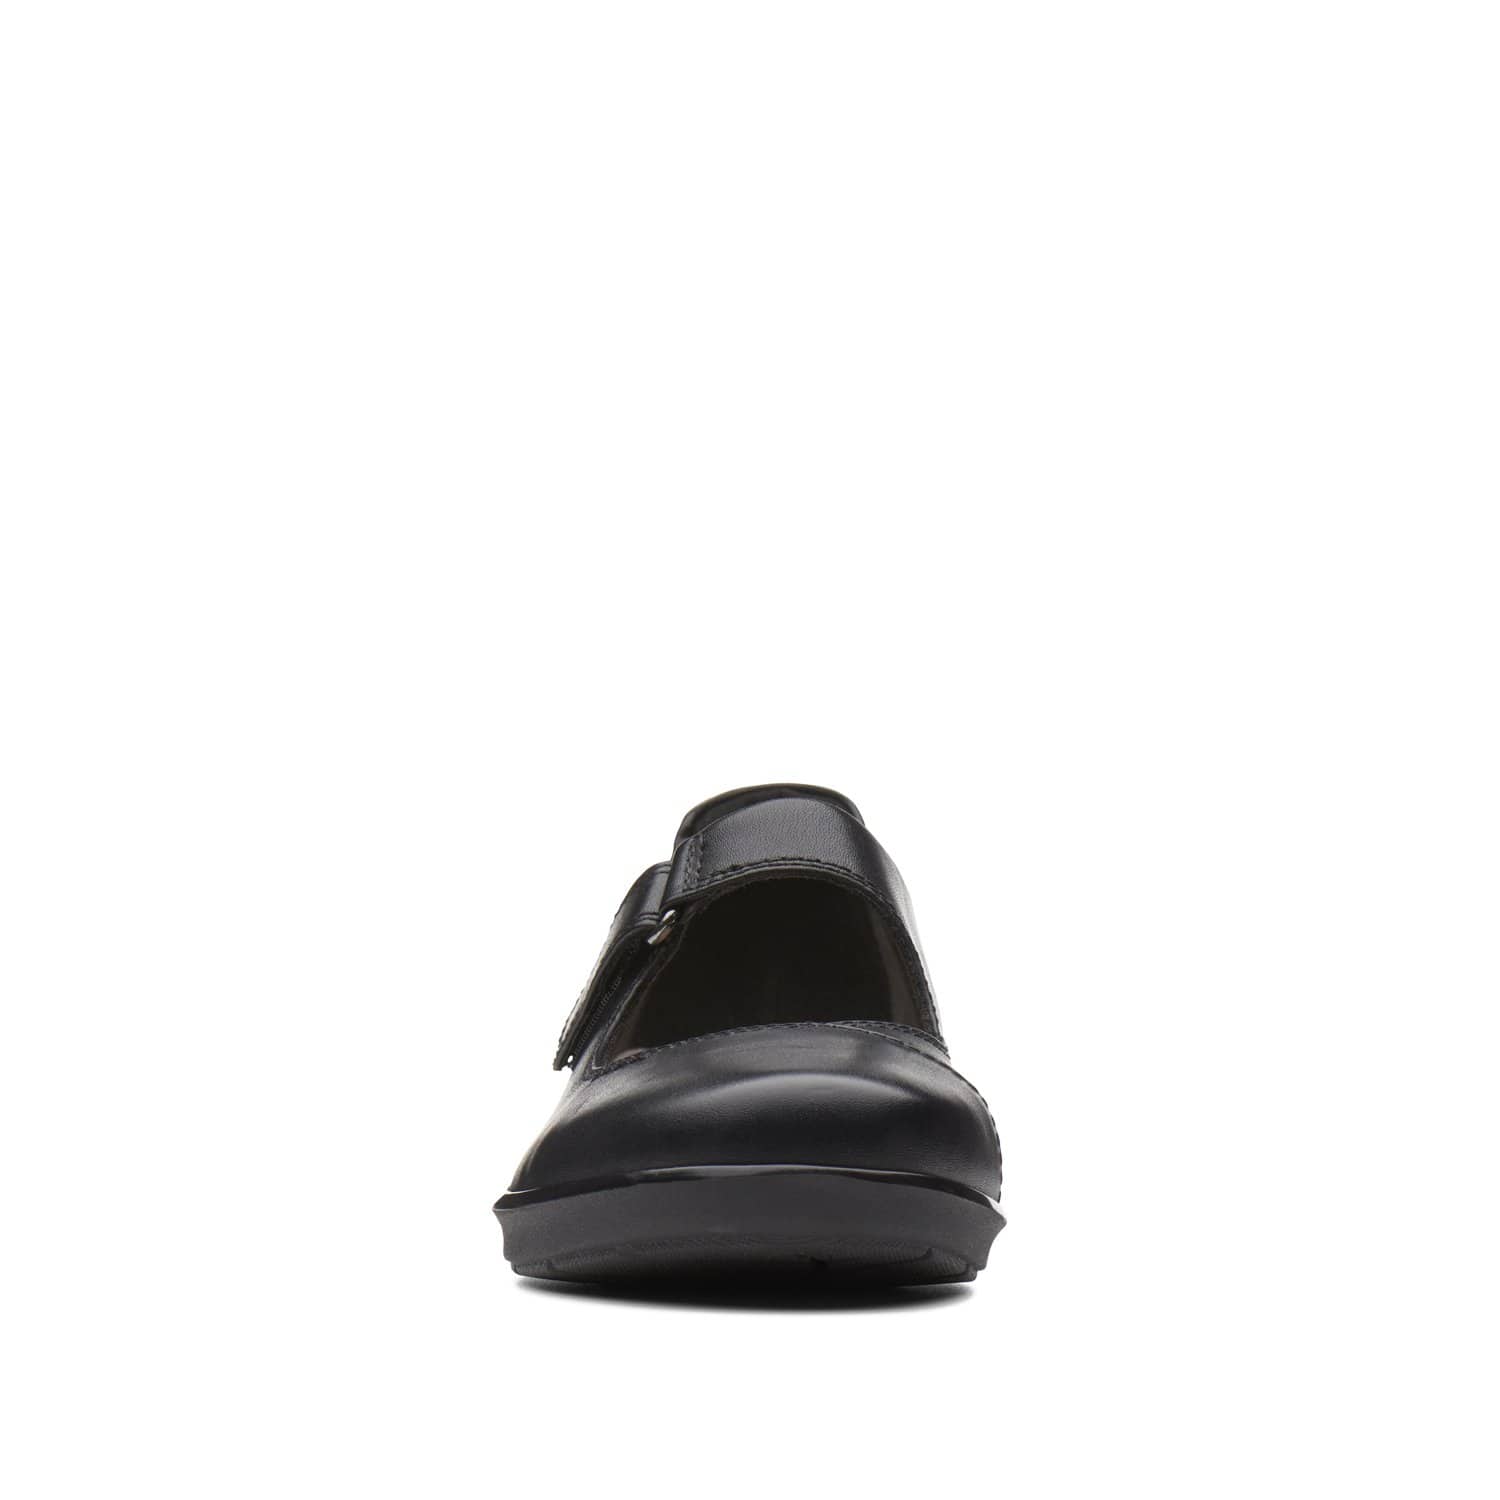 Clarks-Hope-Henley-Women's-Shoes-Black-Leather-26137185